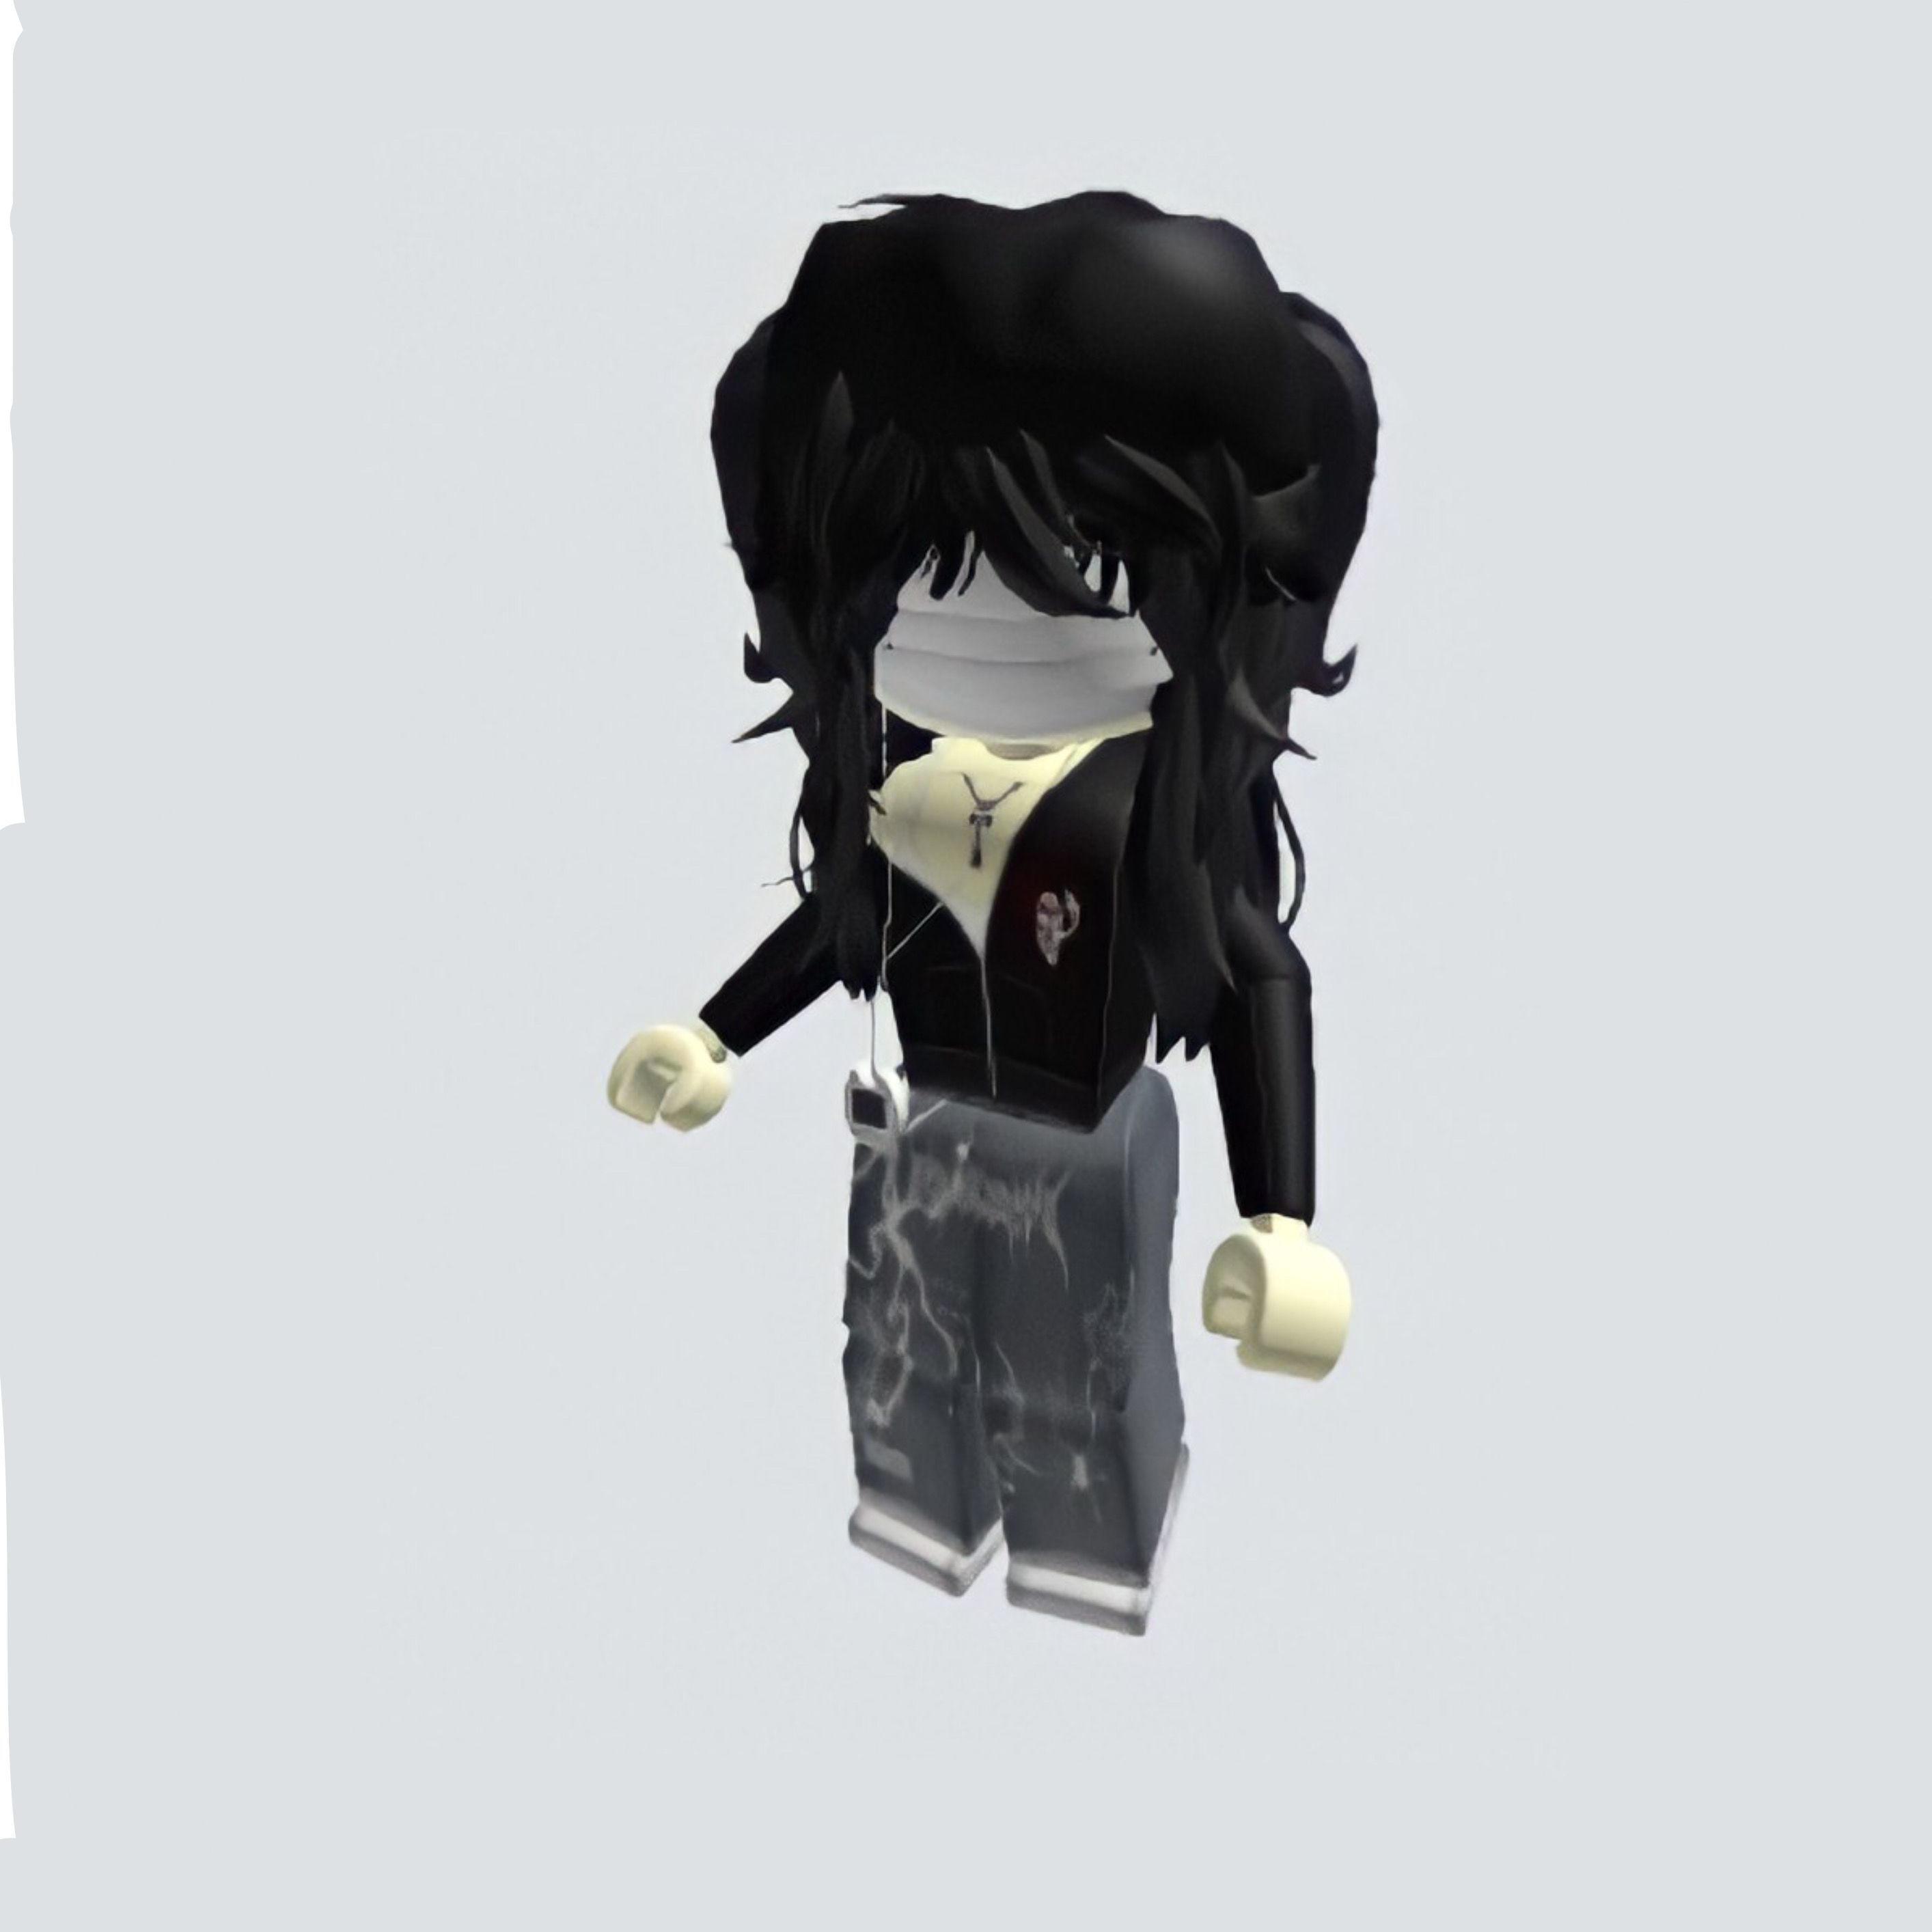 Free download Terrica on Hairstylez Roblox pictures Cool avatars